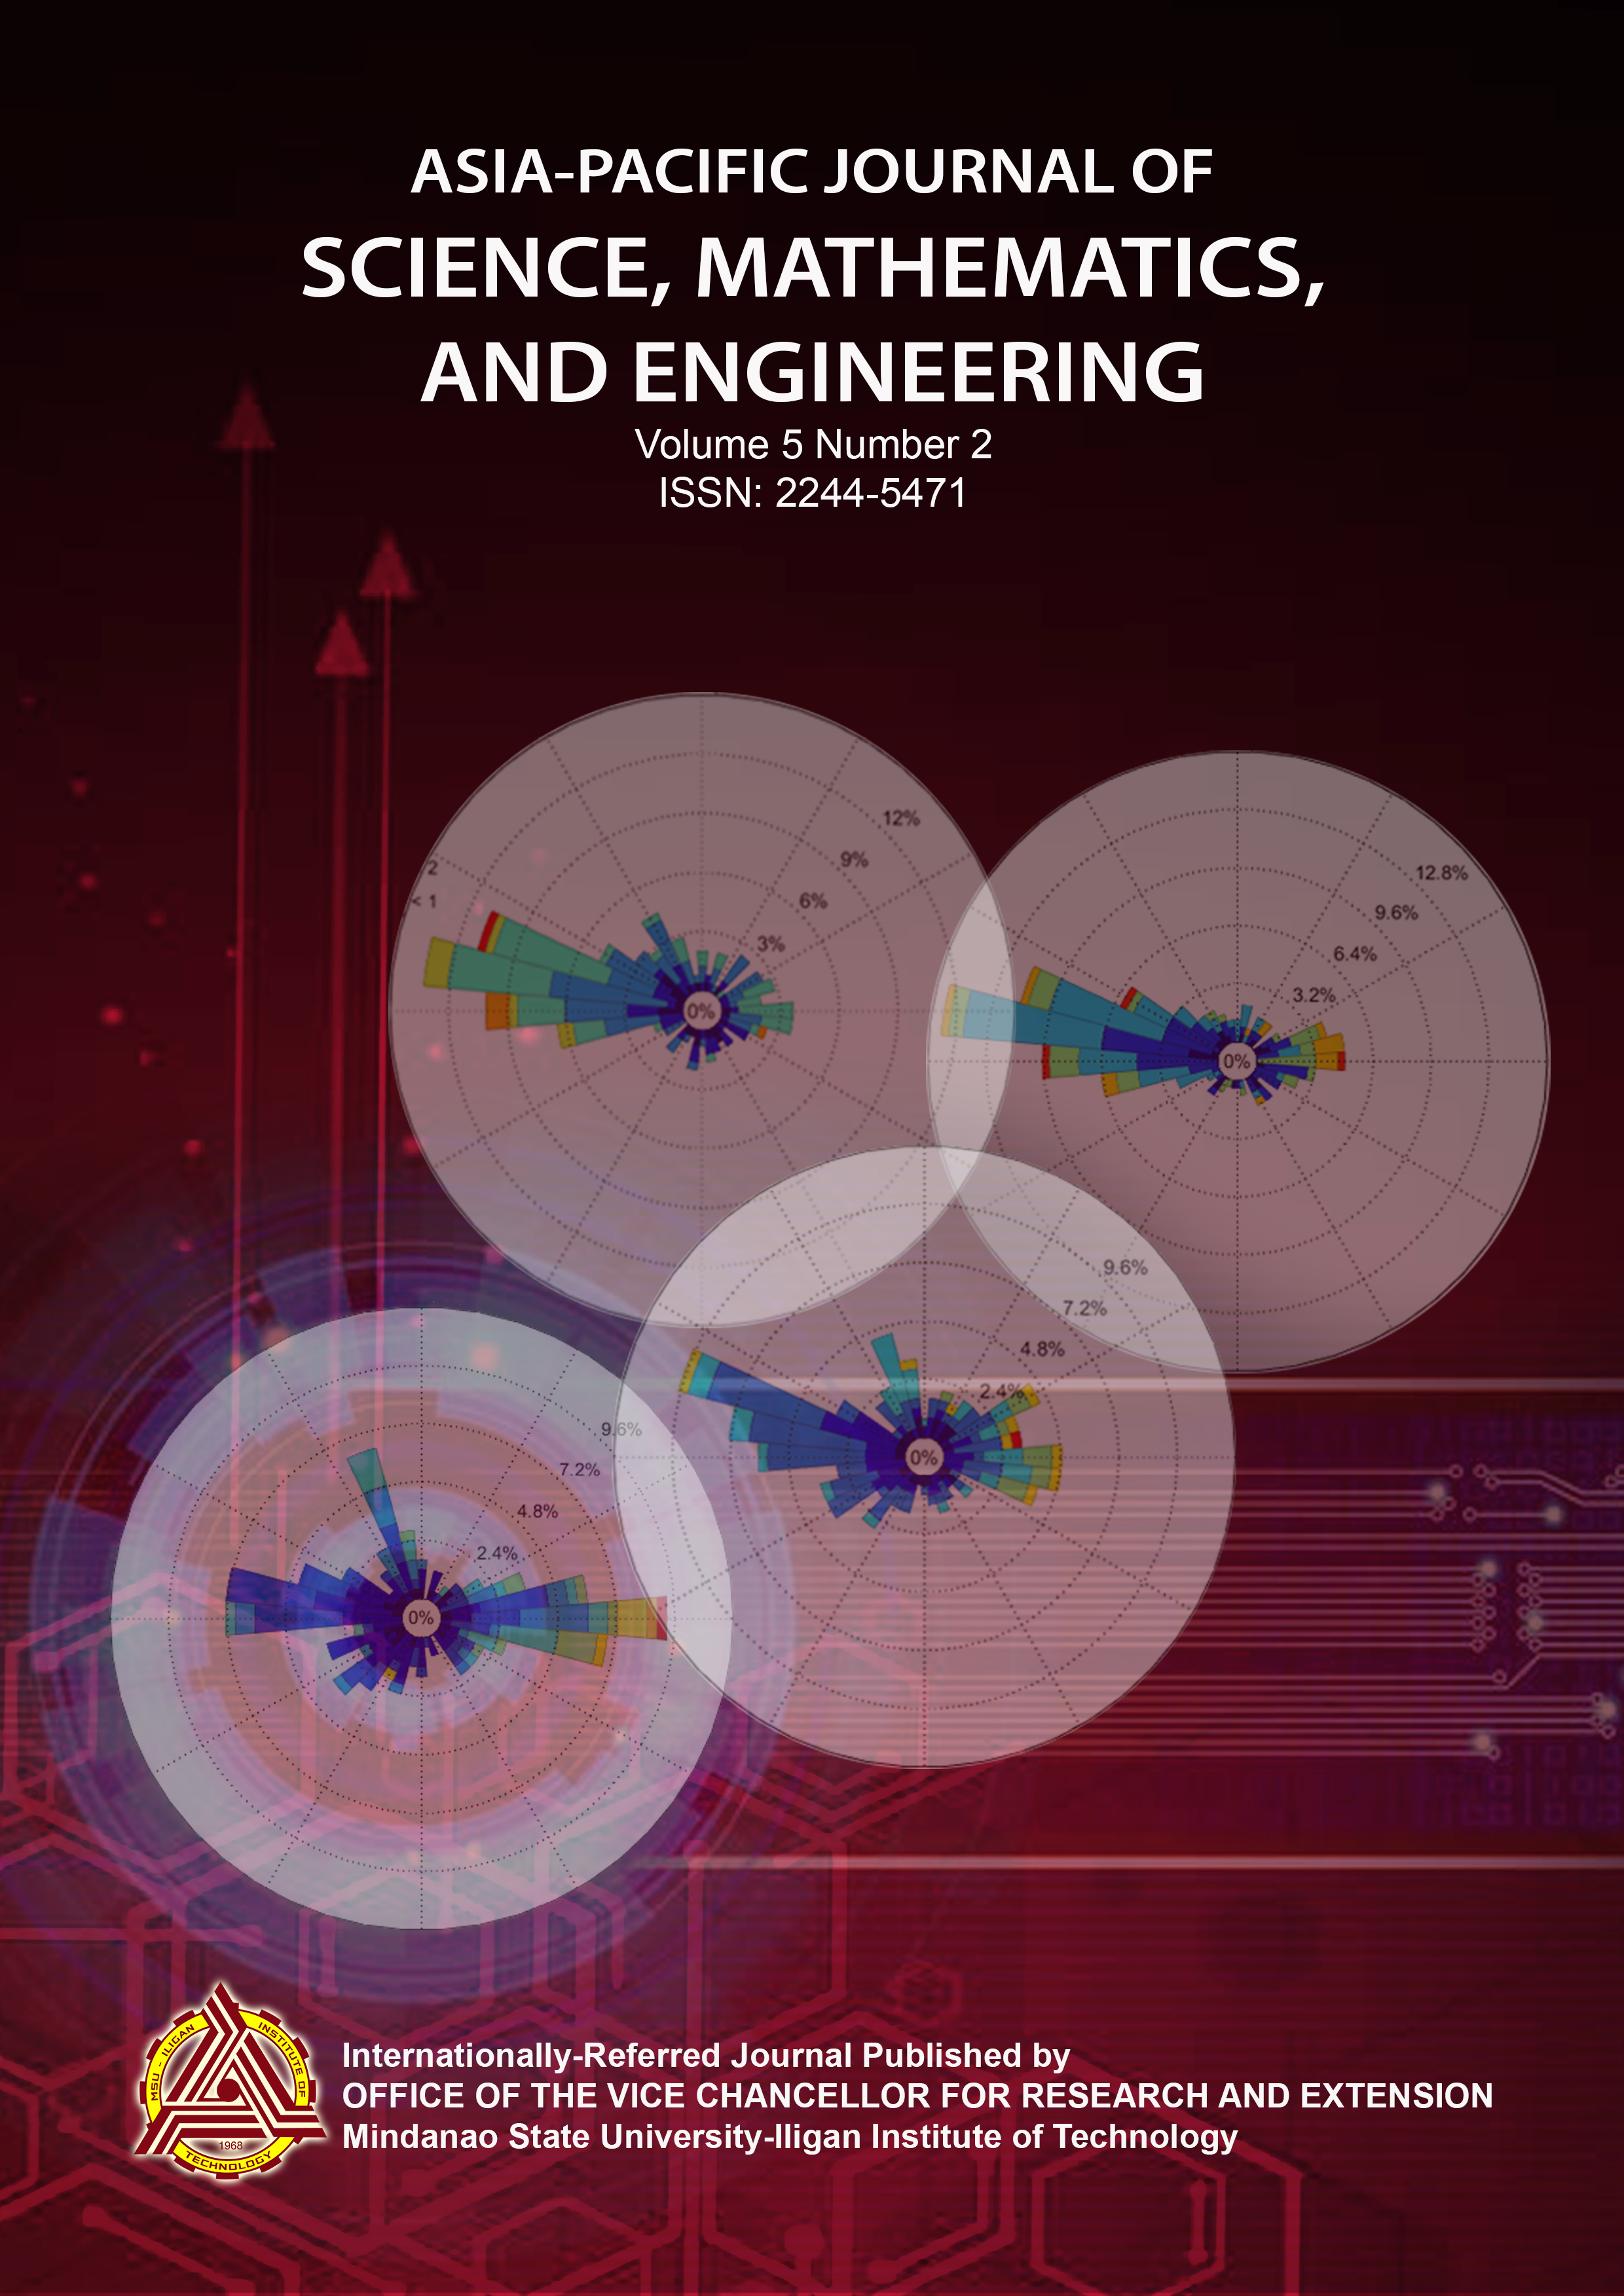 					View Vol. 5 No. 2 (2019): Asia-Pacific Journal of Science, Mathematics, and Engineering
				